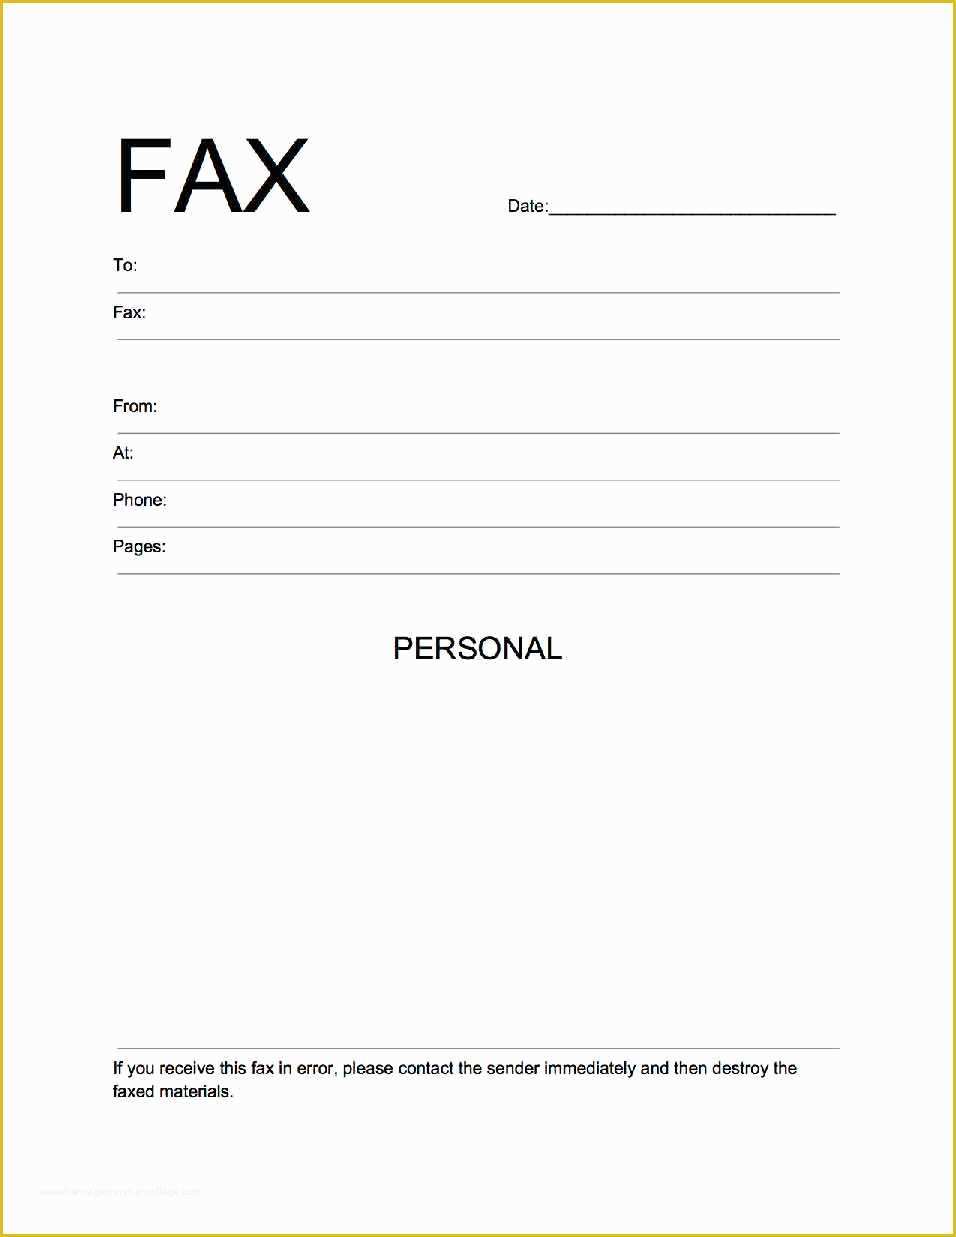 Fax Cover Sheet Template Free Of Free Fax Cover Sheet Template Download